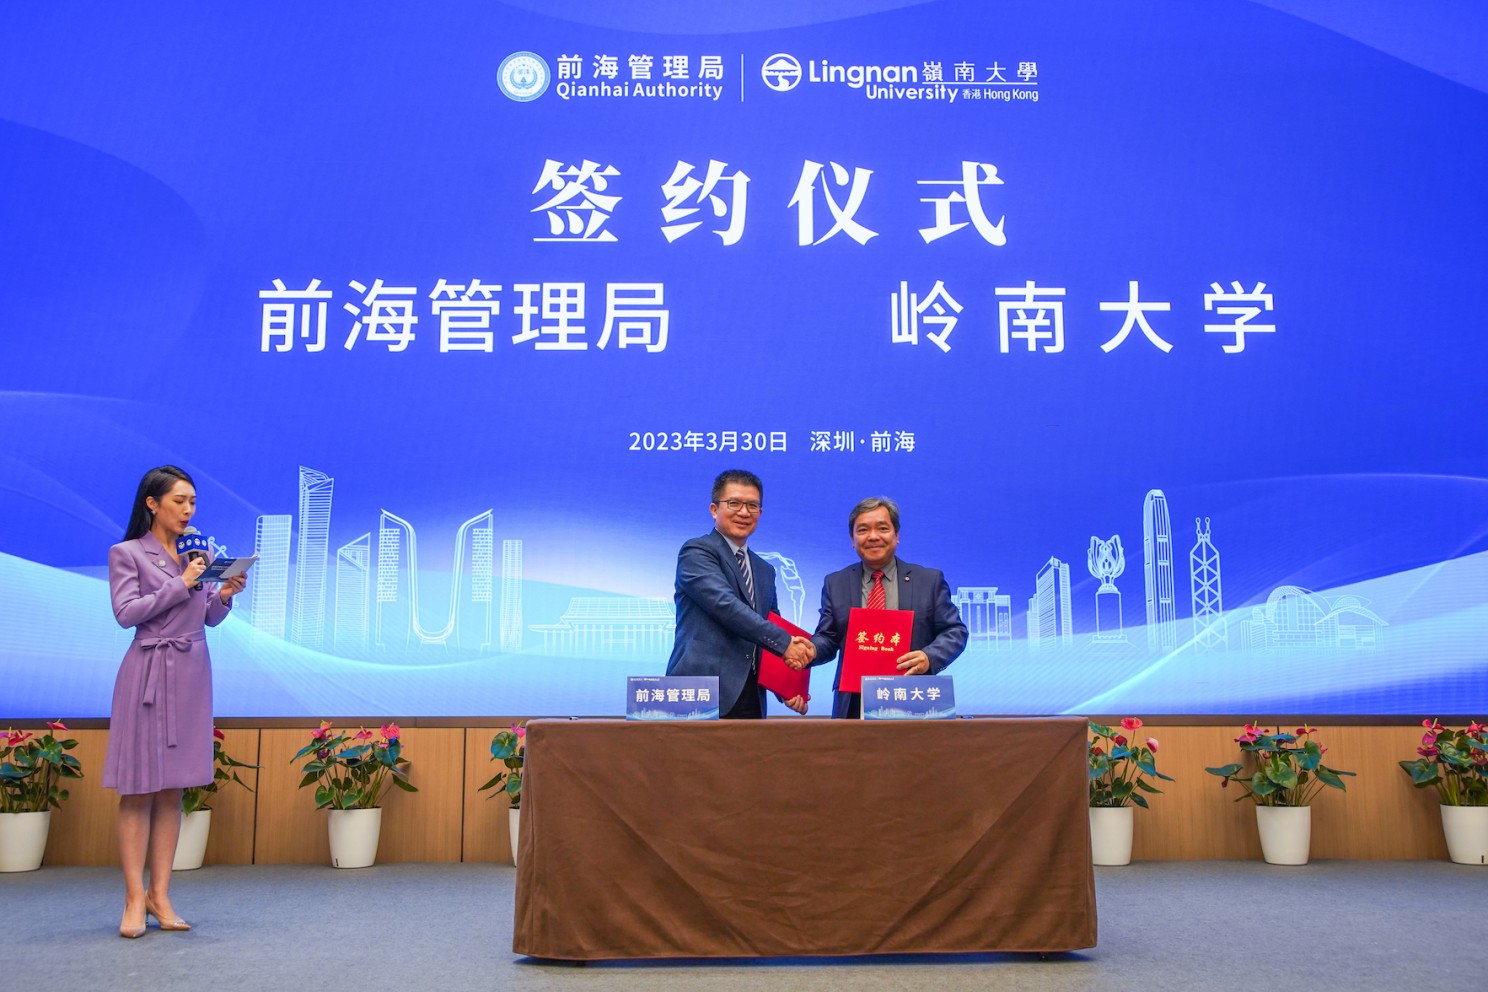 To promote the development of the cultural and creative industries in the Qianhai Cooperation Zone, Lingnan University and The Authority of Qianhai hold the strategic cooperation agreement signing cum plaque unveiling ceremony. 